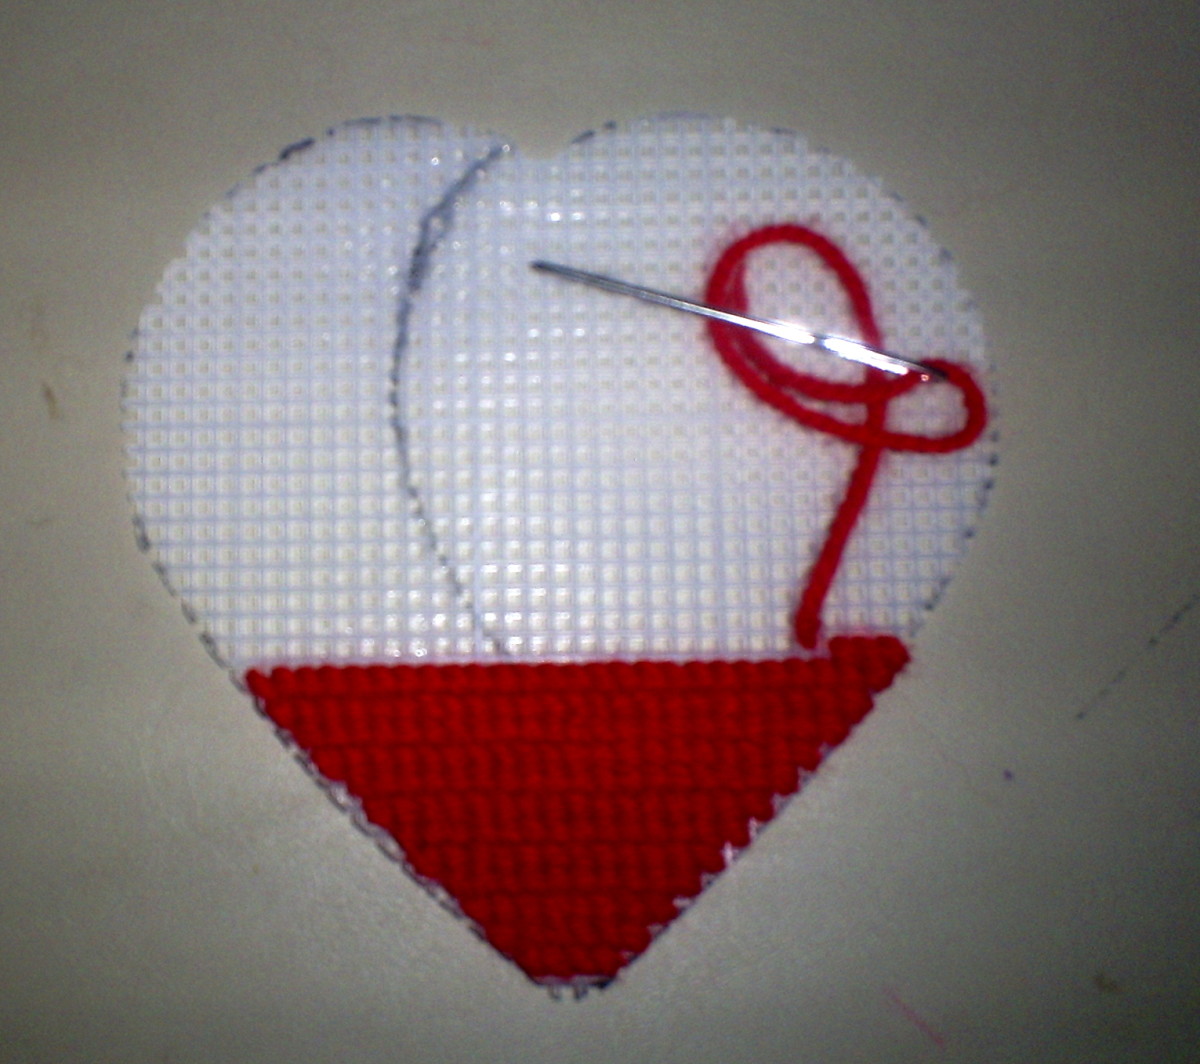 The heart is about a third of the way cross stitched.